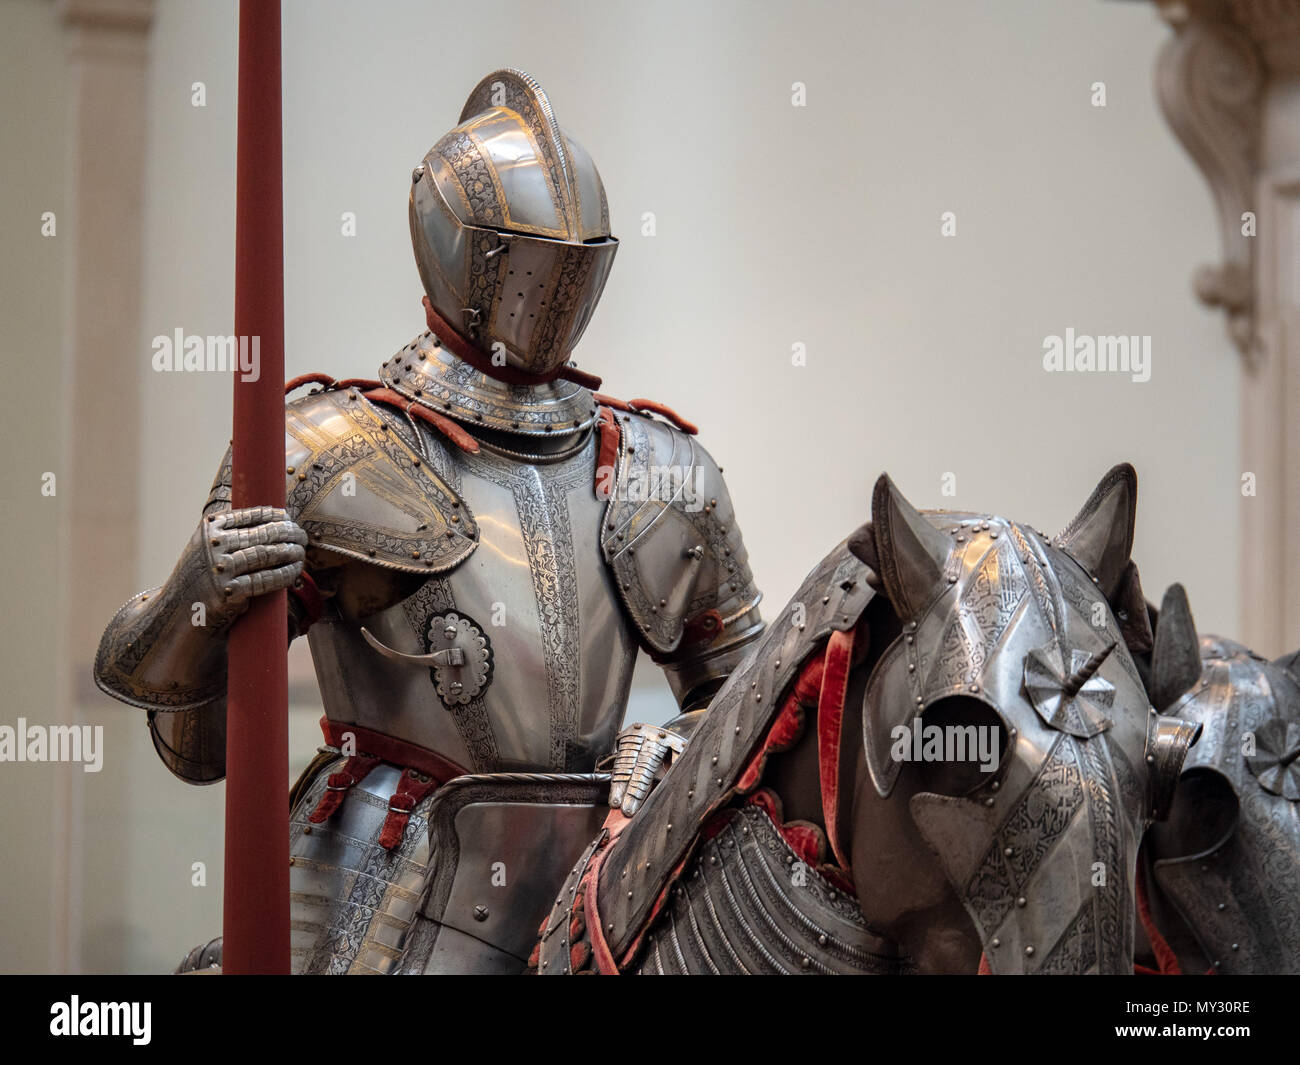 An exhibition of 15th century German plate armor around the time of late Middle Ages. The knight holds a land in his right arm while mounted on a heav Stock Photo